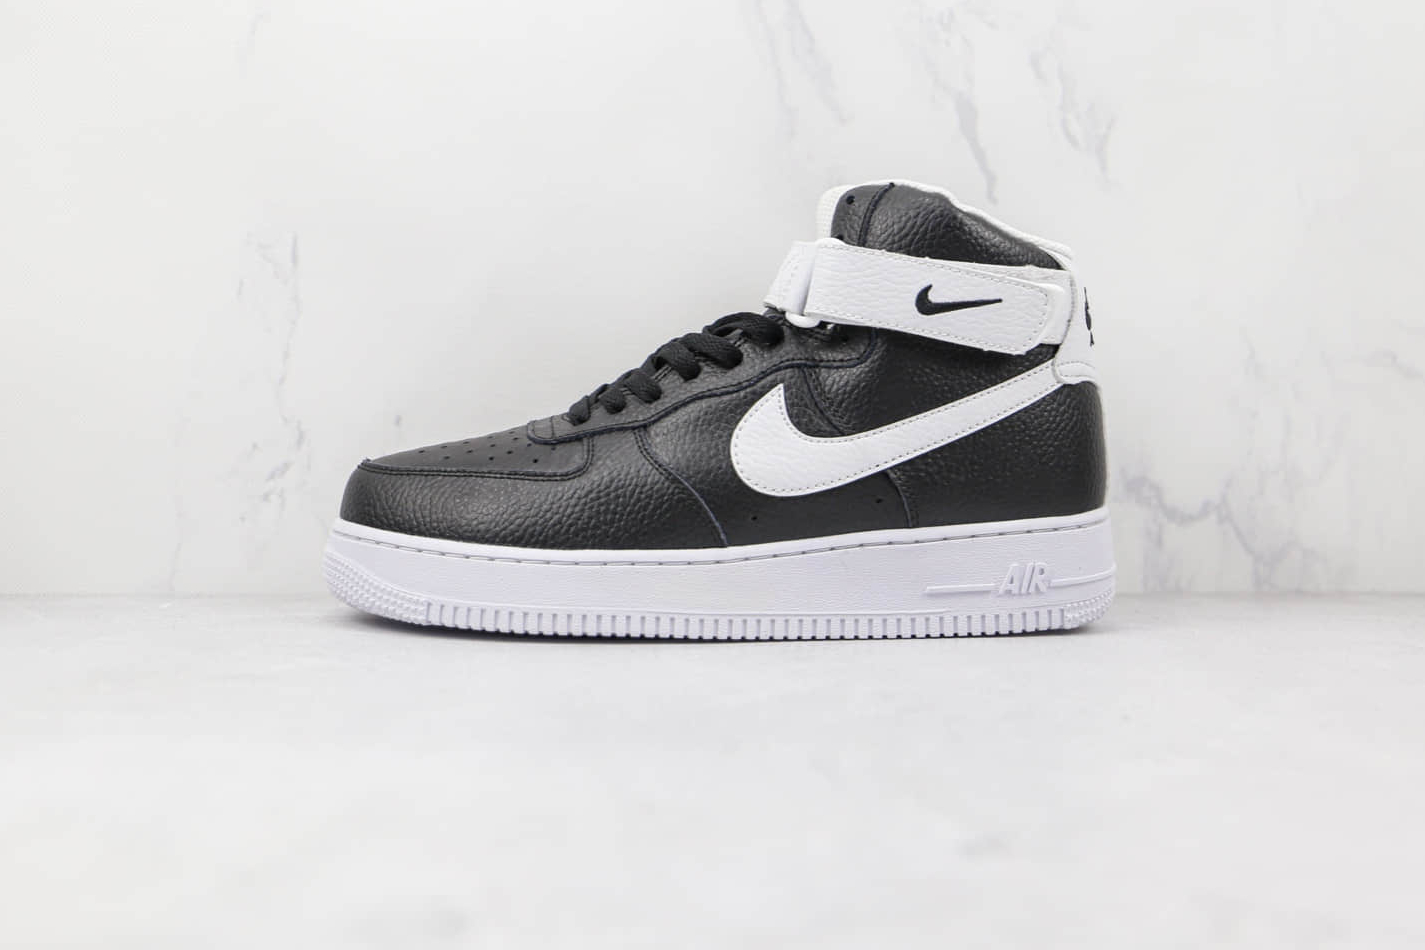 Nike Air Force 1 '07 'Black White' CT2302-002 - Classic Sneakers with Timeless Style